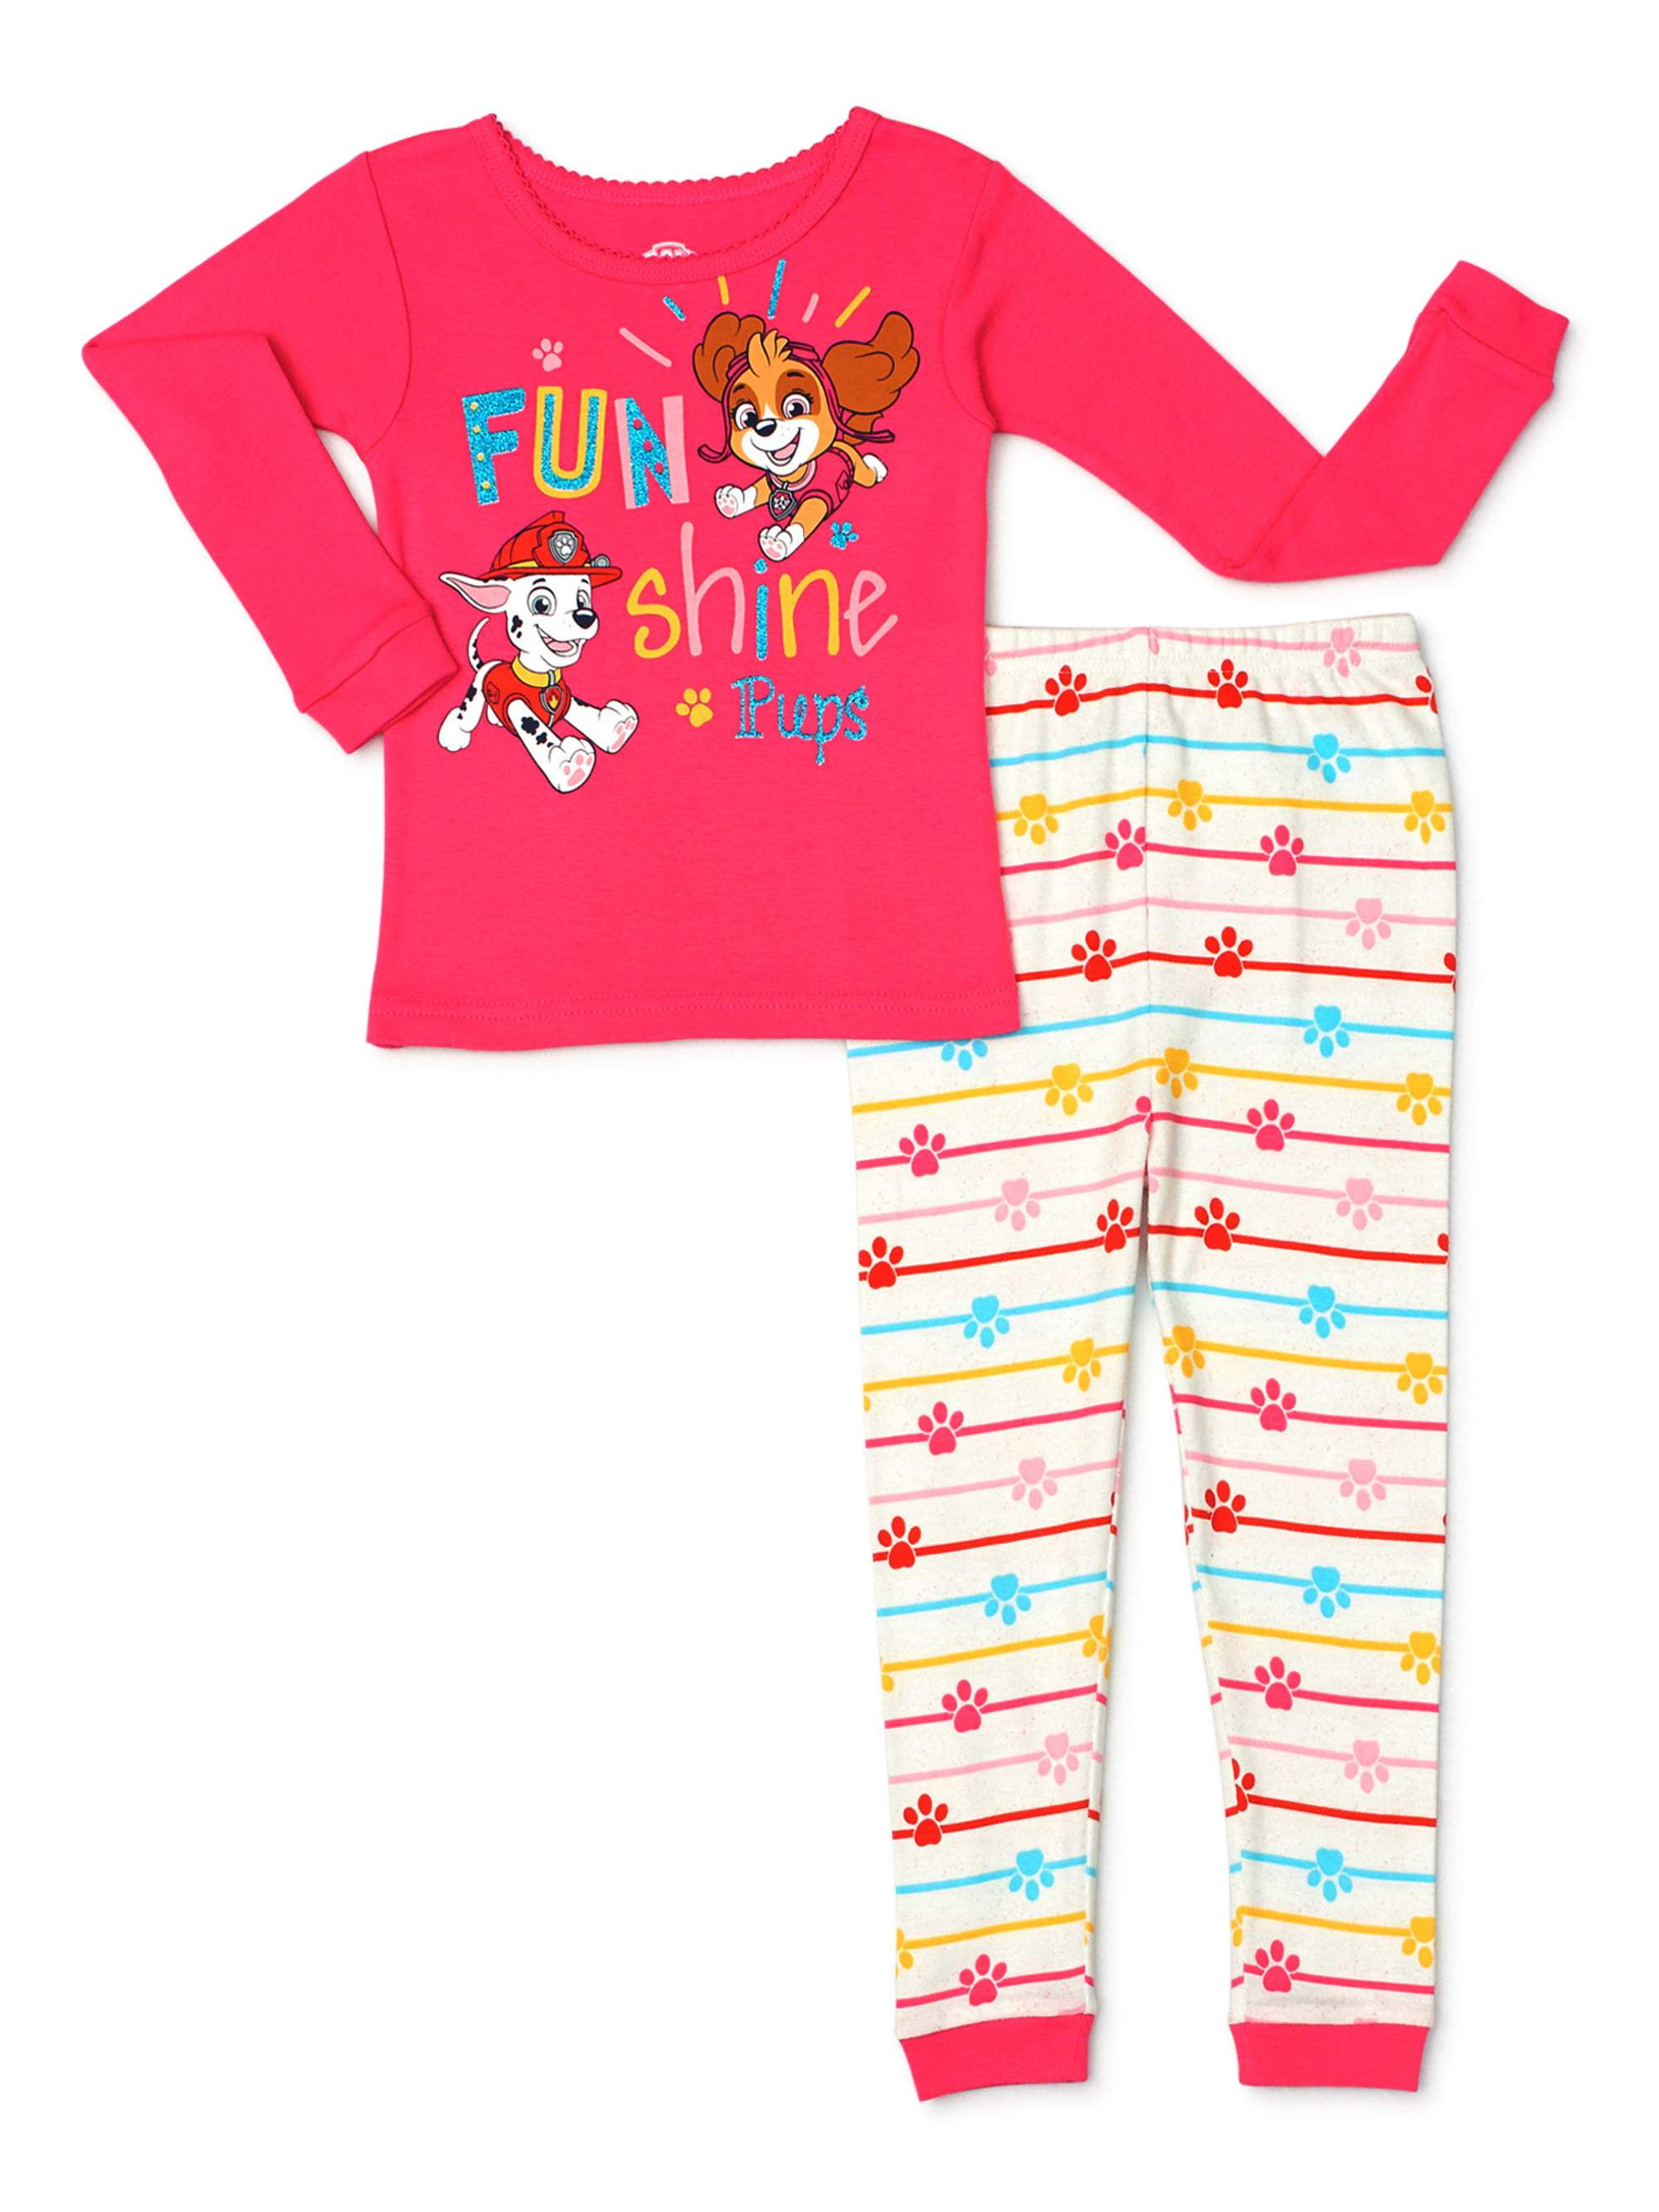 18 Months to 5 Years Cartoon Character Products Paw Patrol Girls Pyjamas